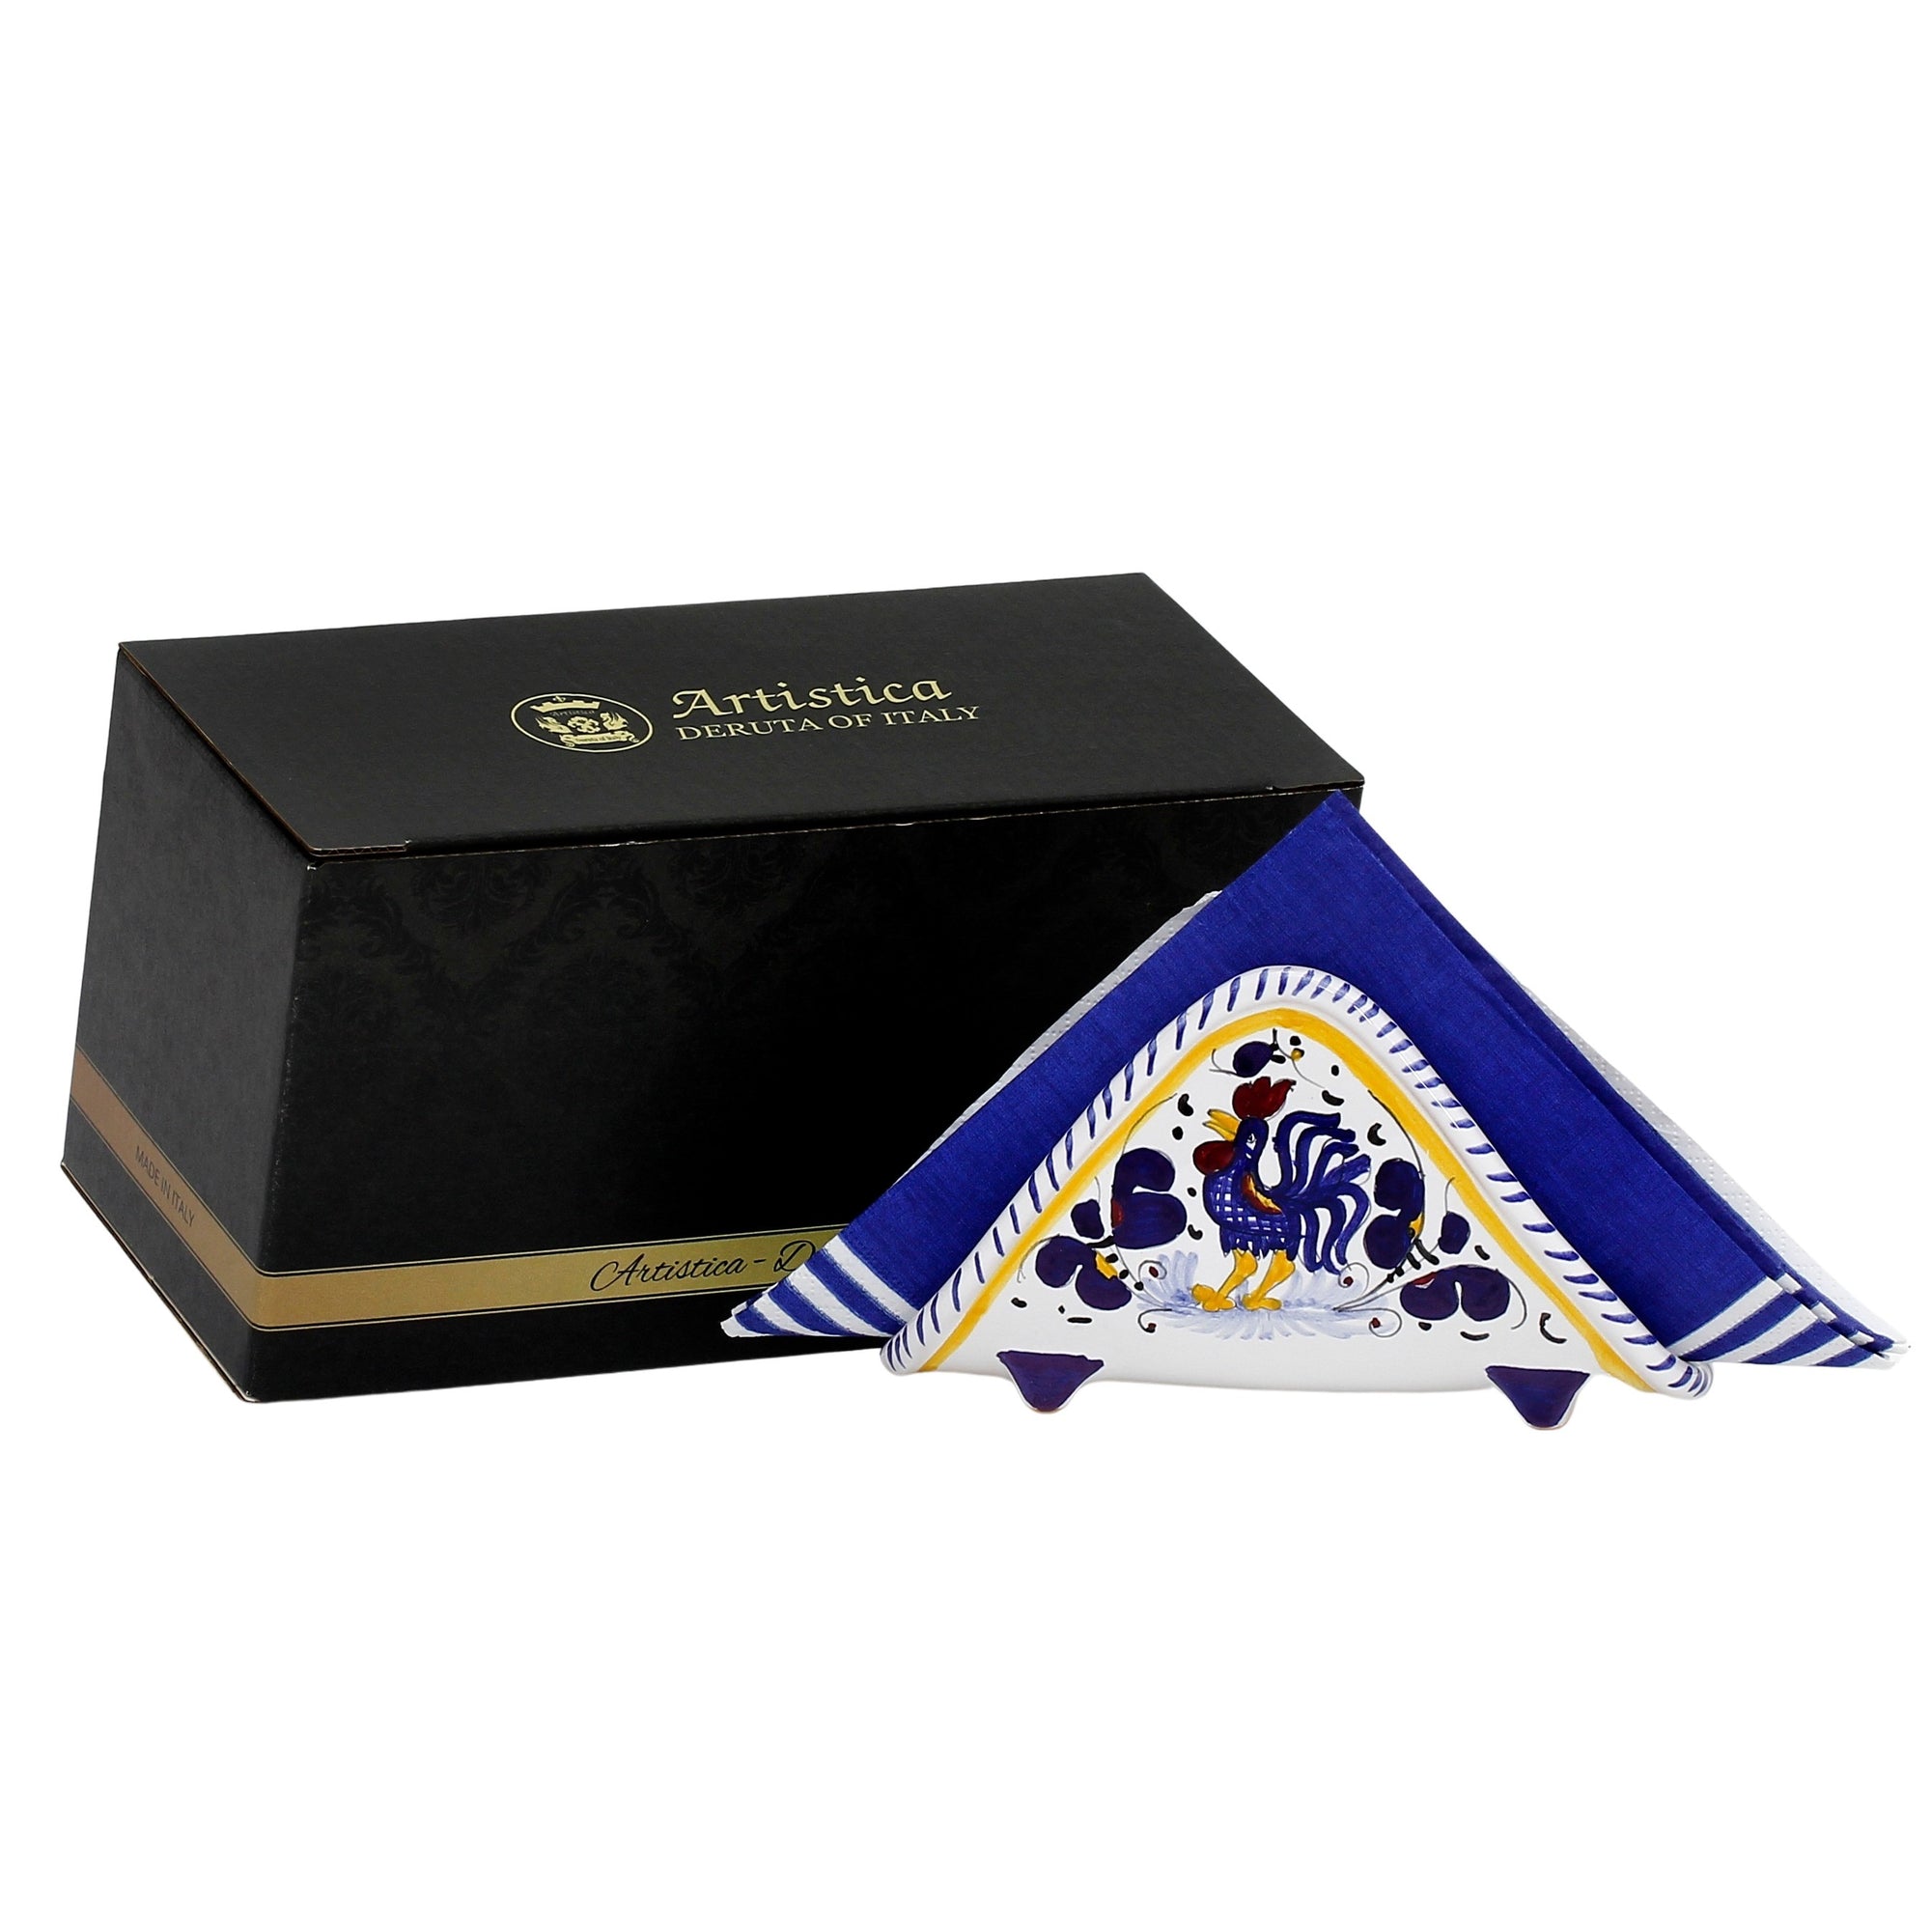 GIFT BOX: With authentic Deruta hand painted ceramic - Napkin Holder Blue Rooster design